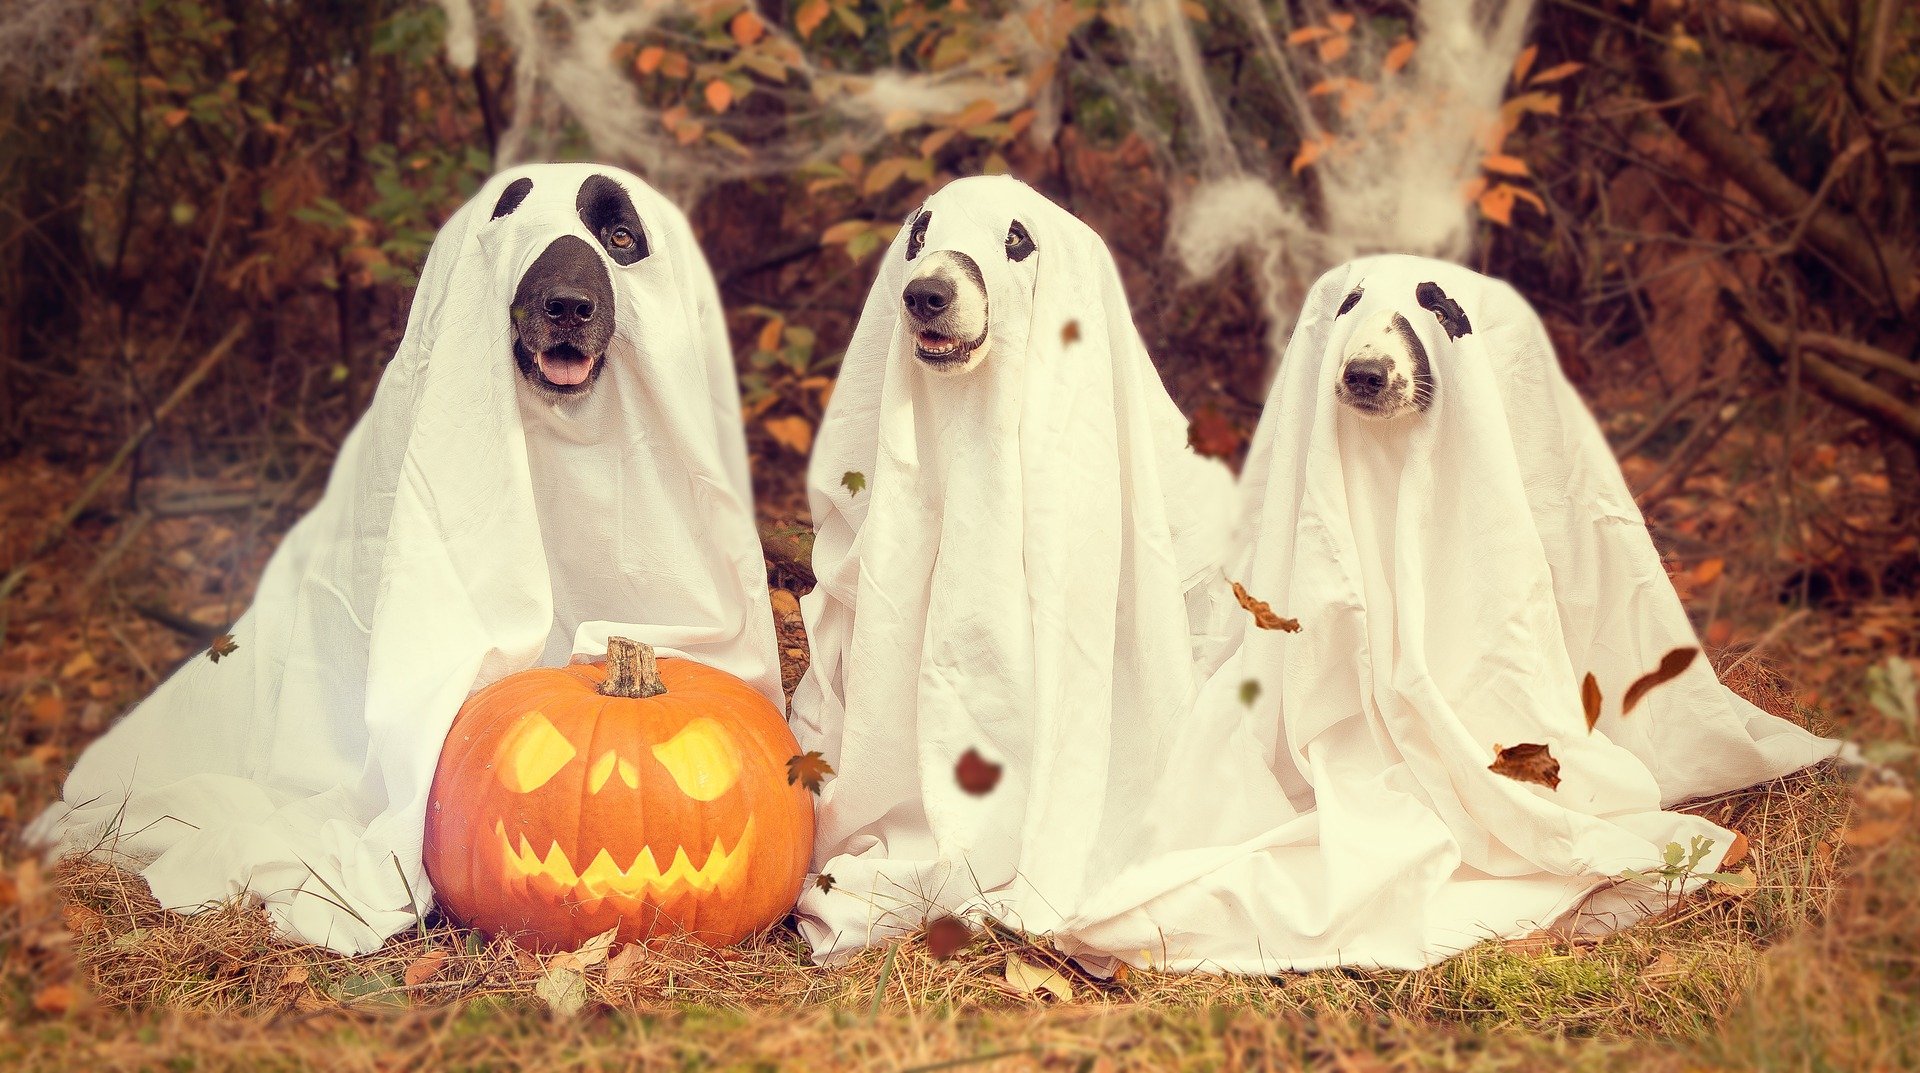 Dogs dressed up as ghosts